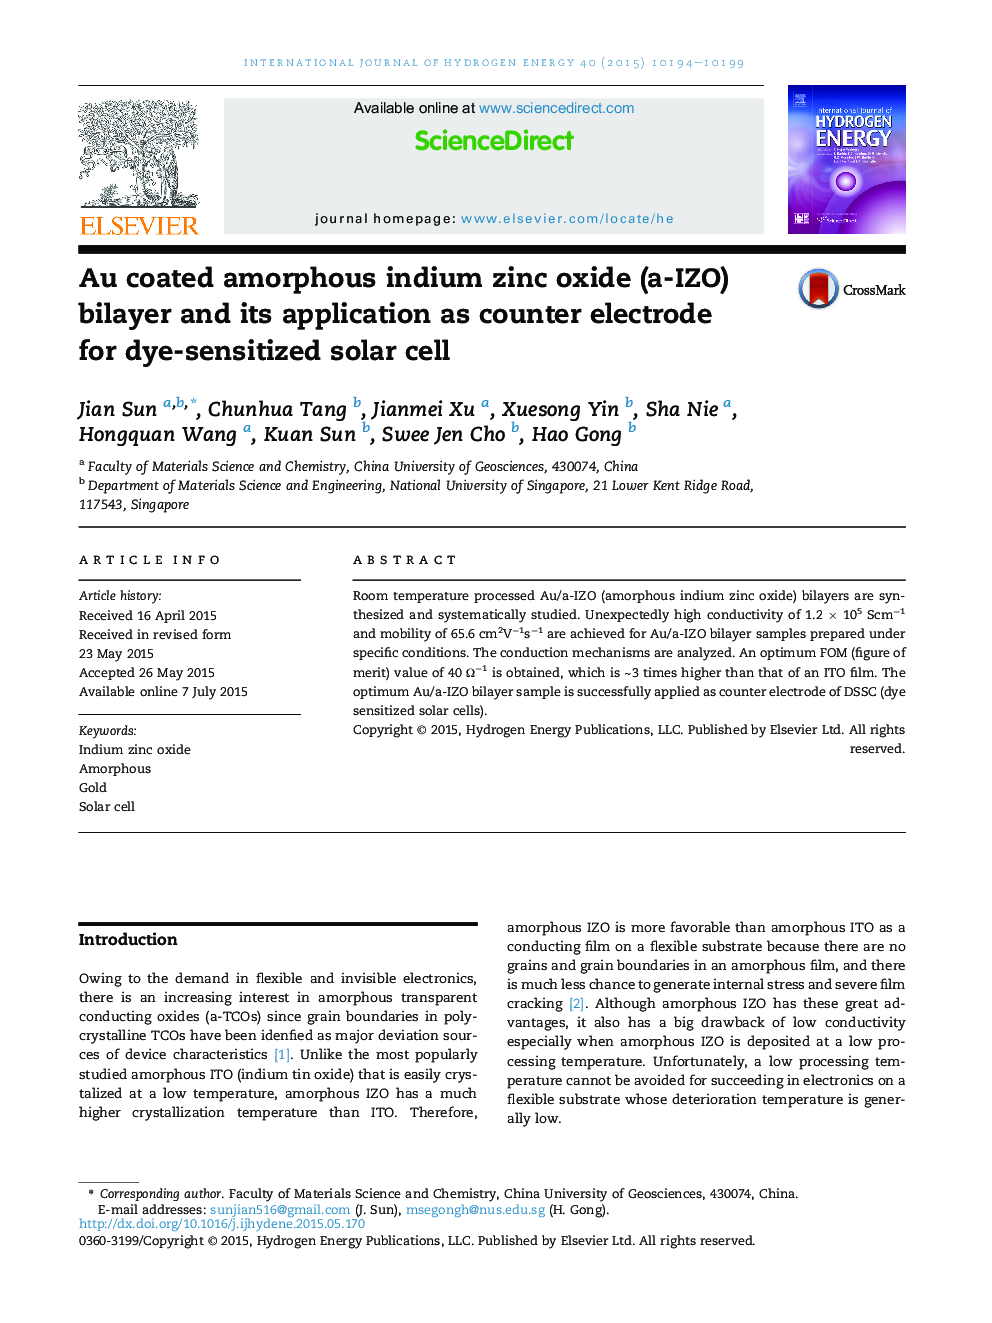 Au coated amorphous indium zinc oxide (a-IZO) bilayer and its application as counter electrode forÂ dye-sensitized solar cell